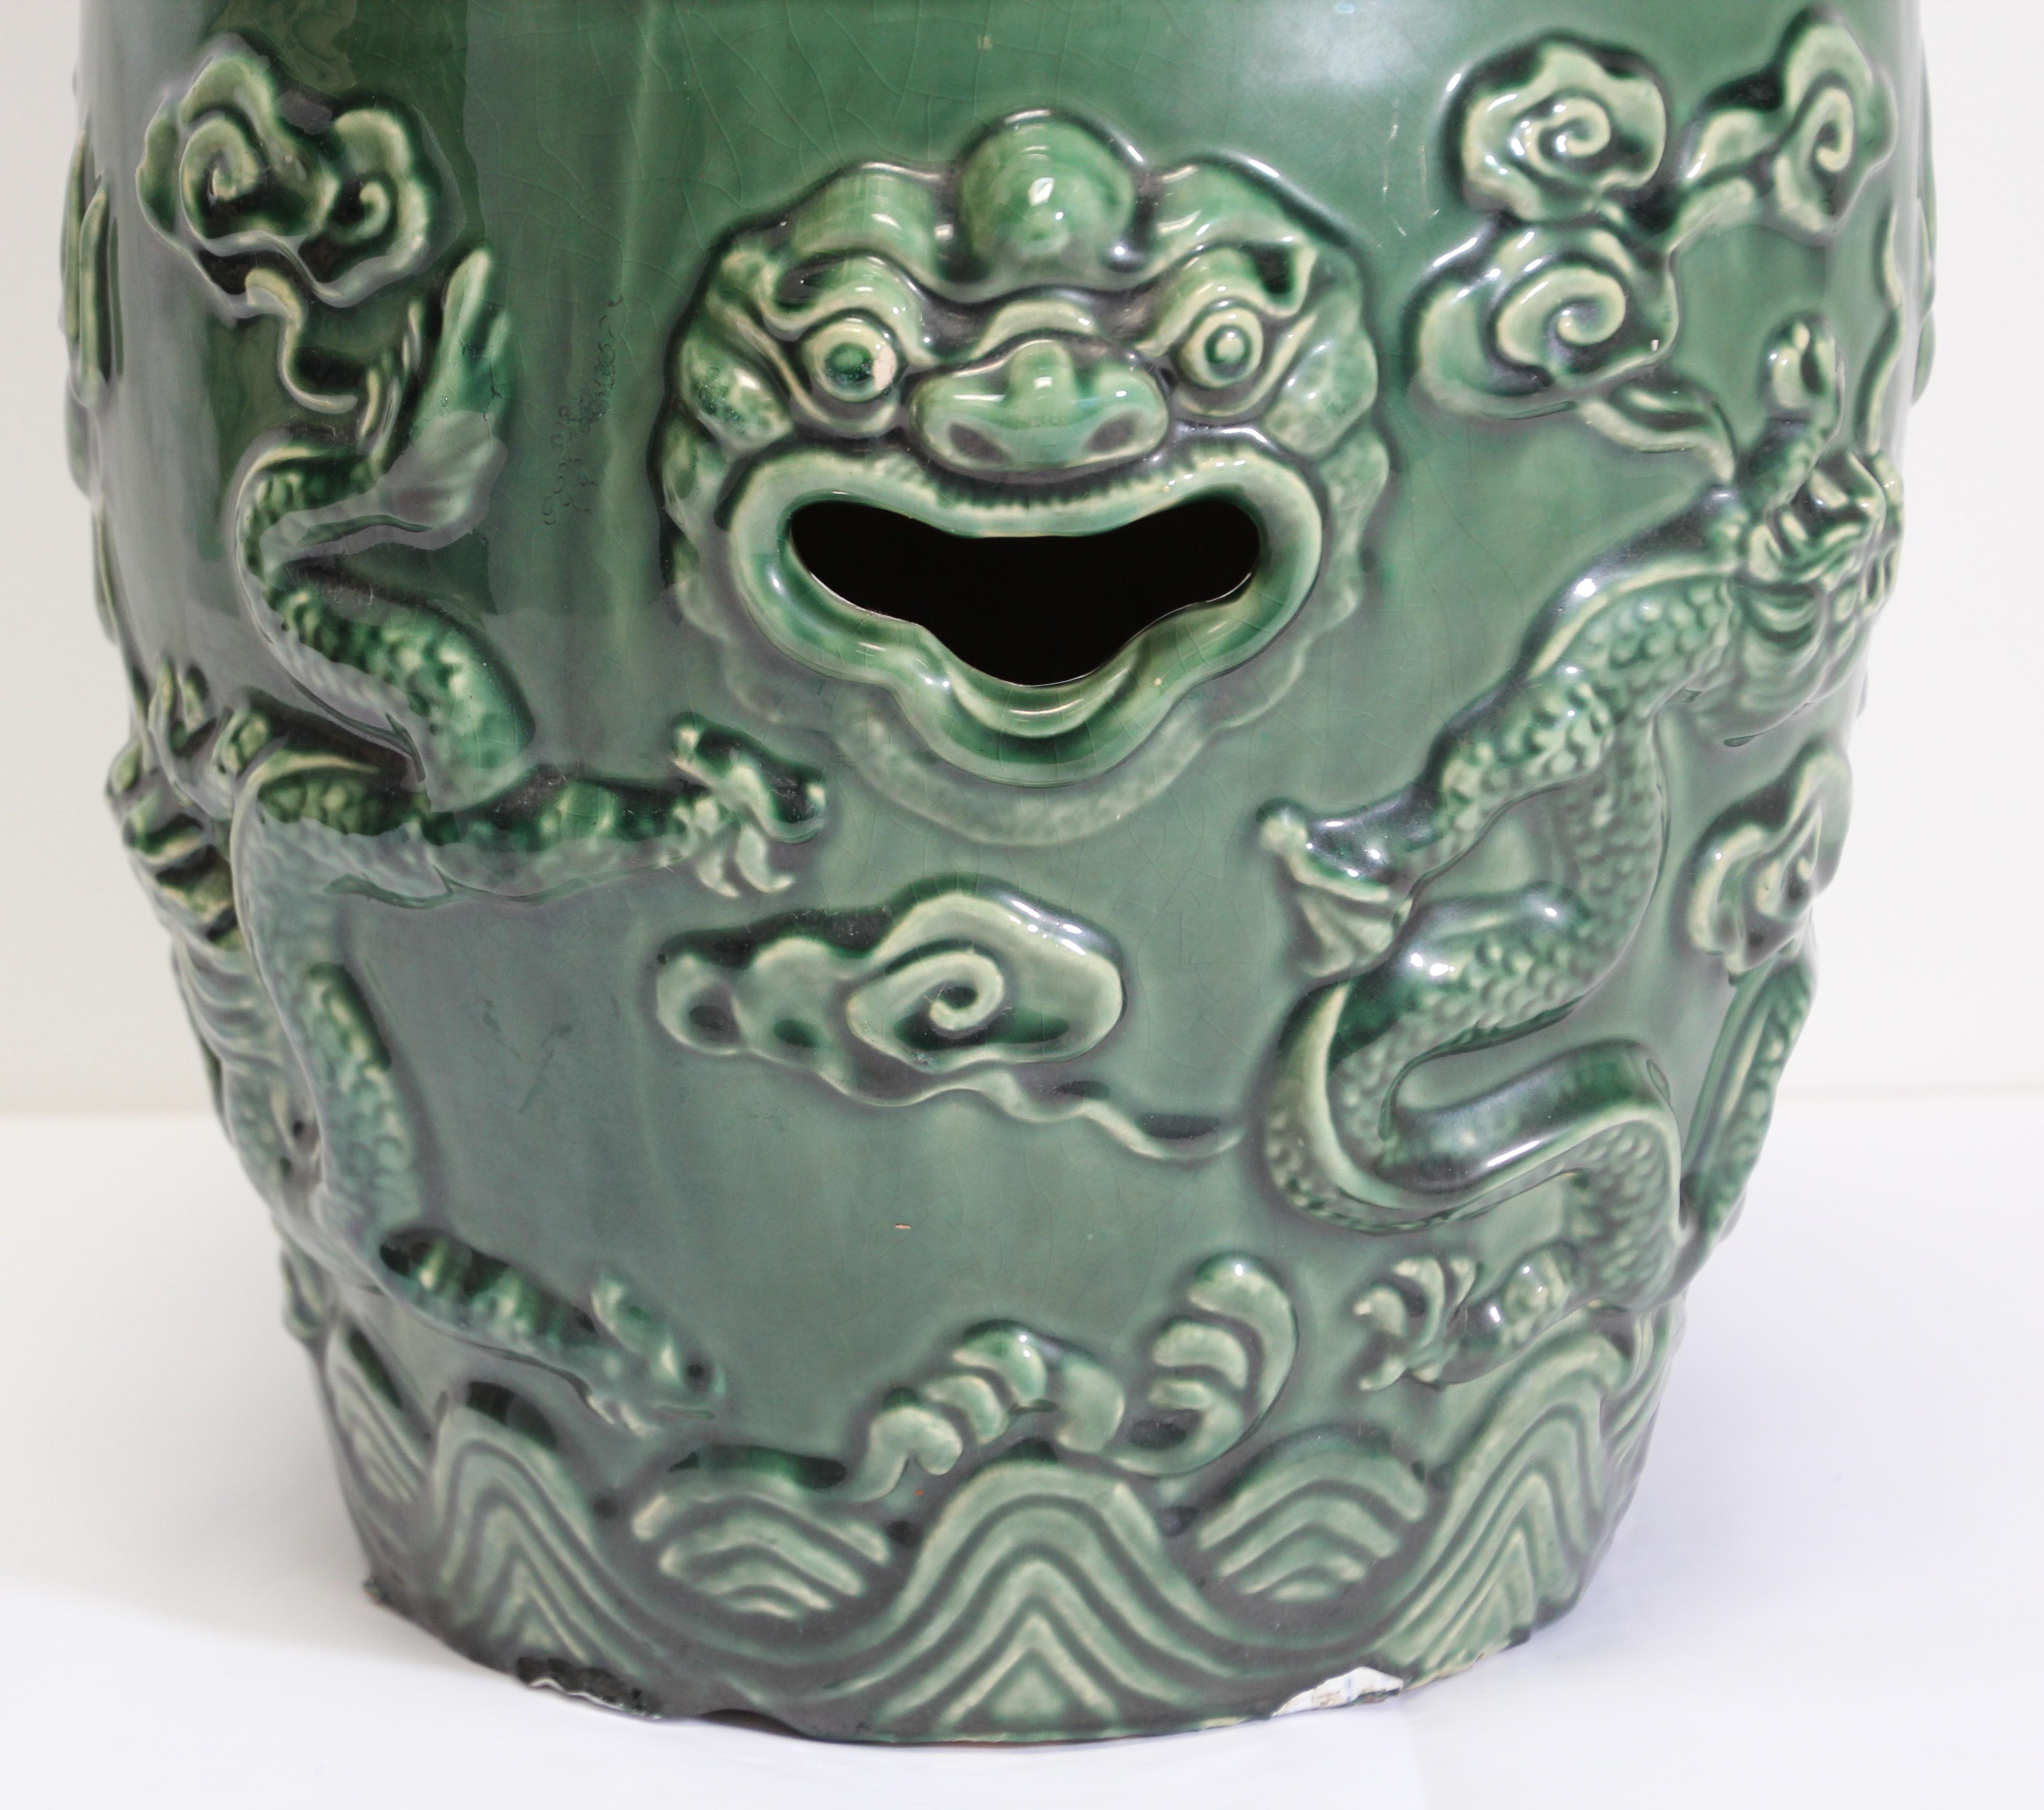 Emerald Green Chinese Ceramic Garden Stool with Dragons 10